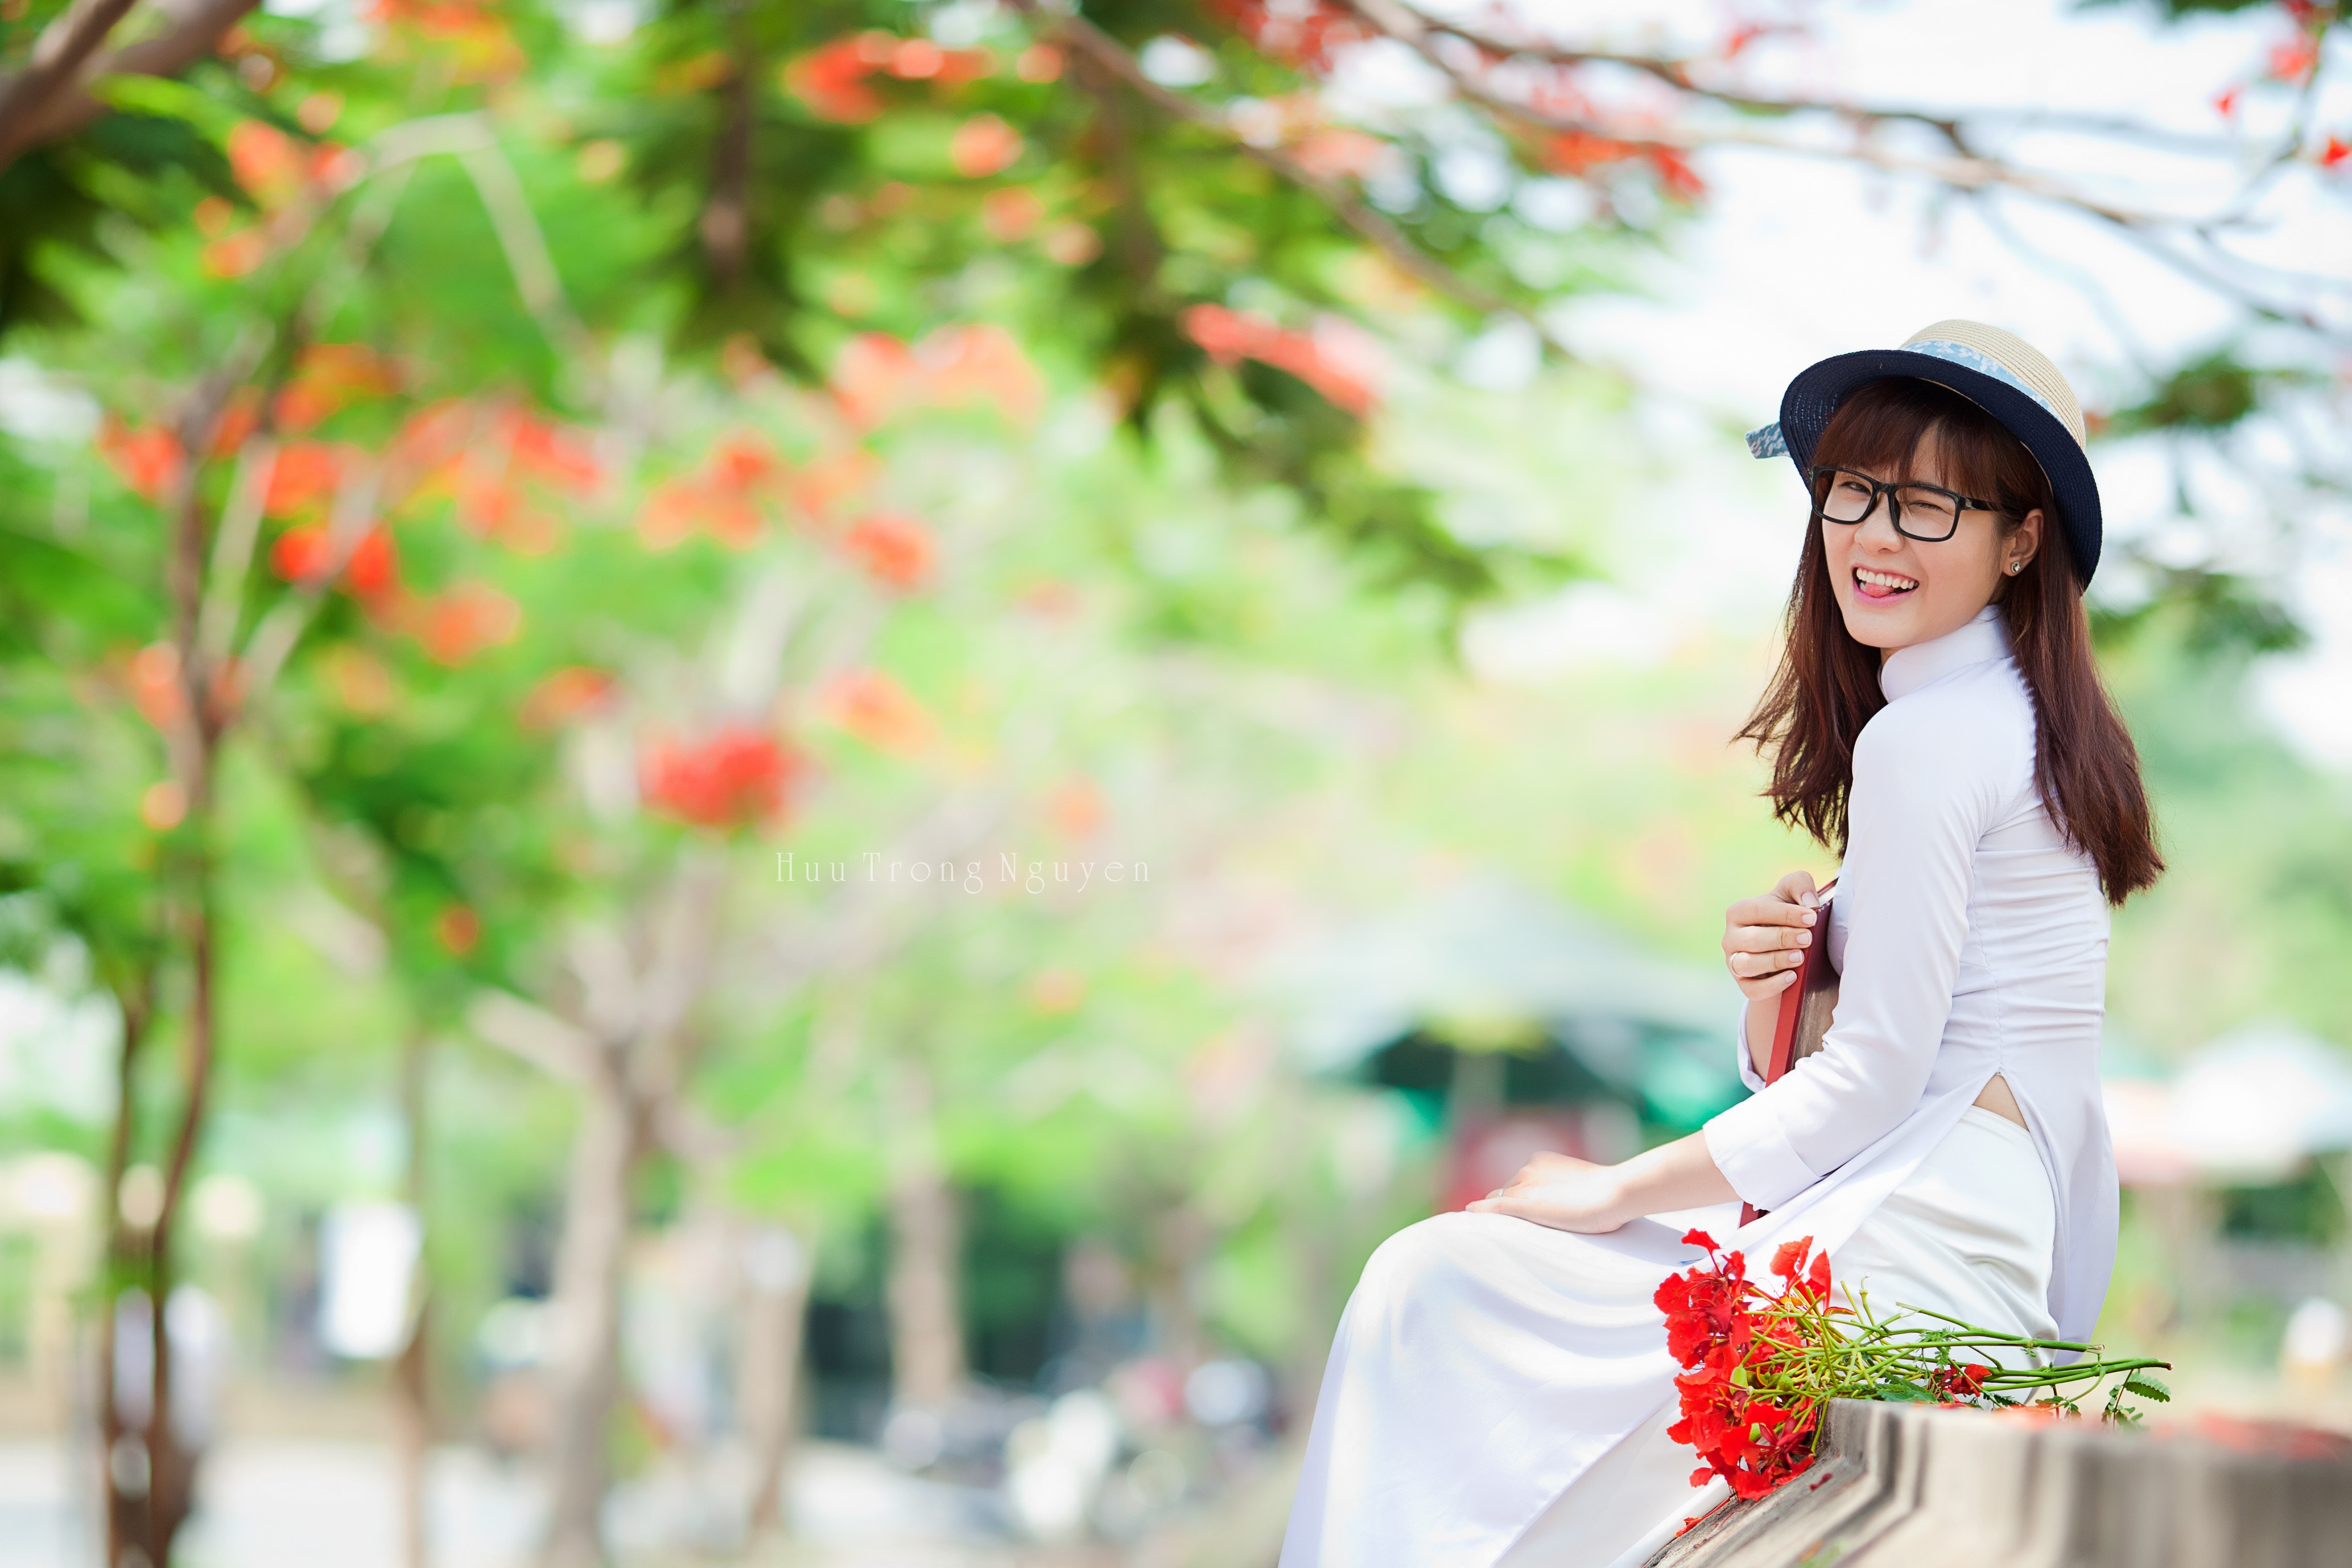 People 4134x2756 fake glasses Vietnam sitting wink hat millinery redhead auburn hair tongues áo dài Vietnamese Vietnam dress women Vietnamese women tongue out women with hats women outdoors long hair white clothing white dress